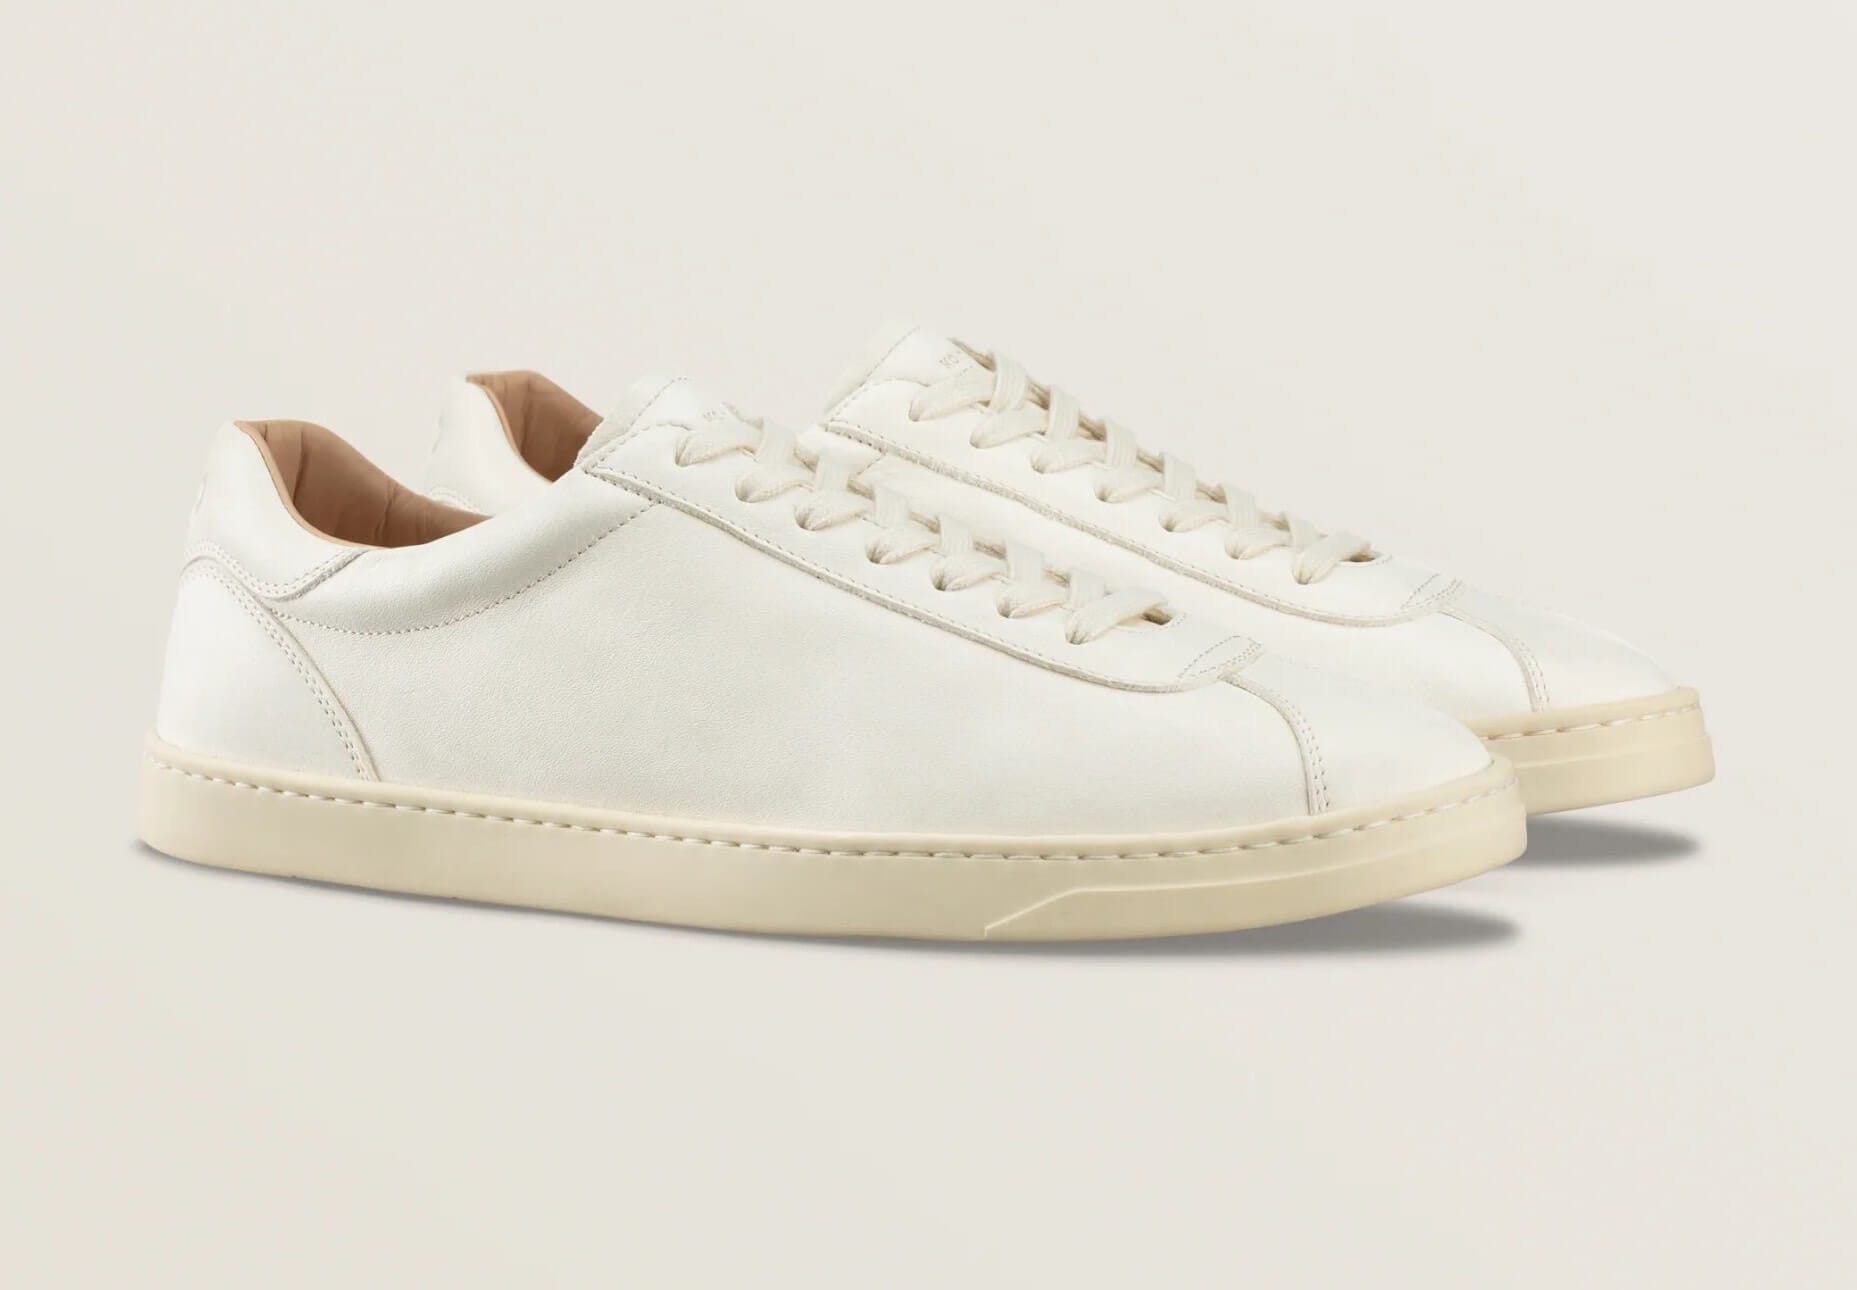 white sneakers for men and women with regenerative leather. The mello by koio.